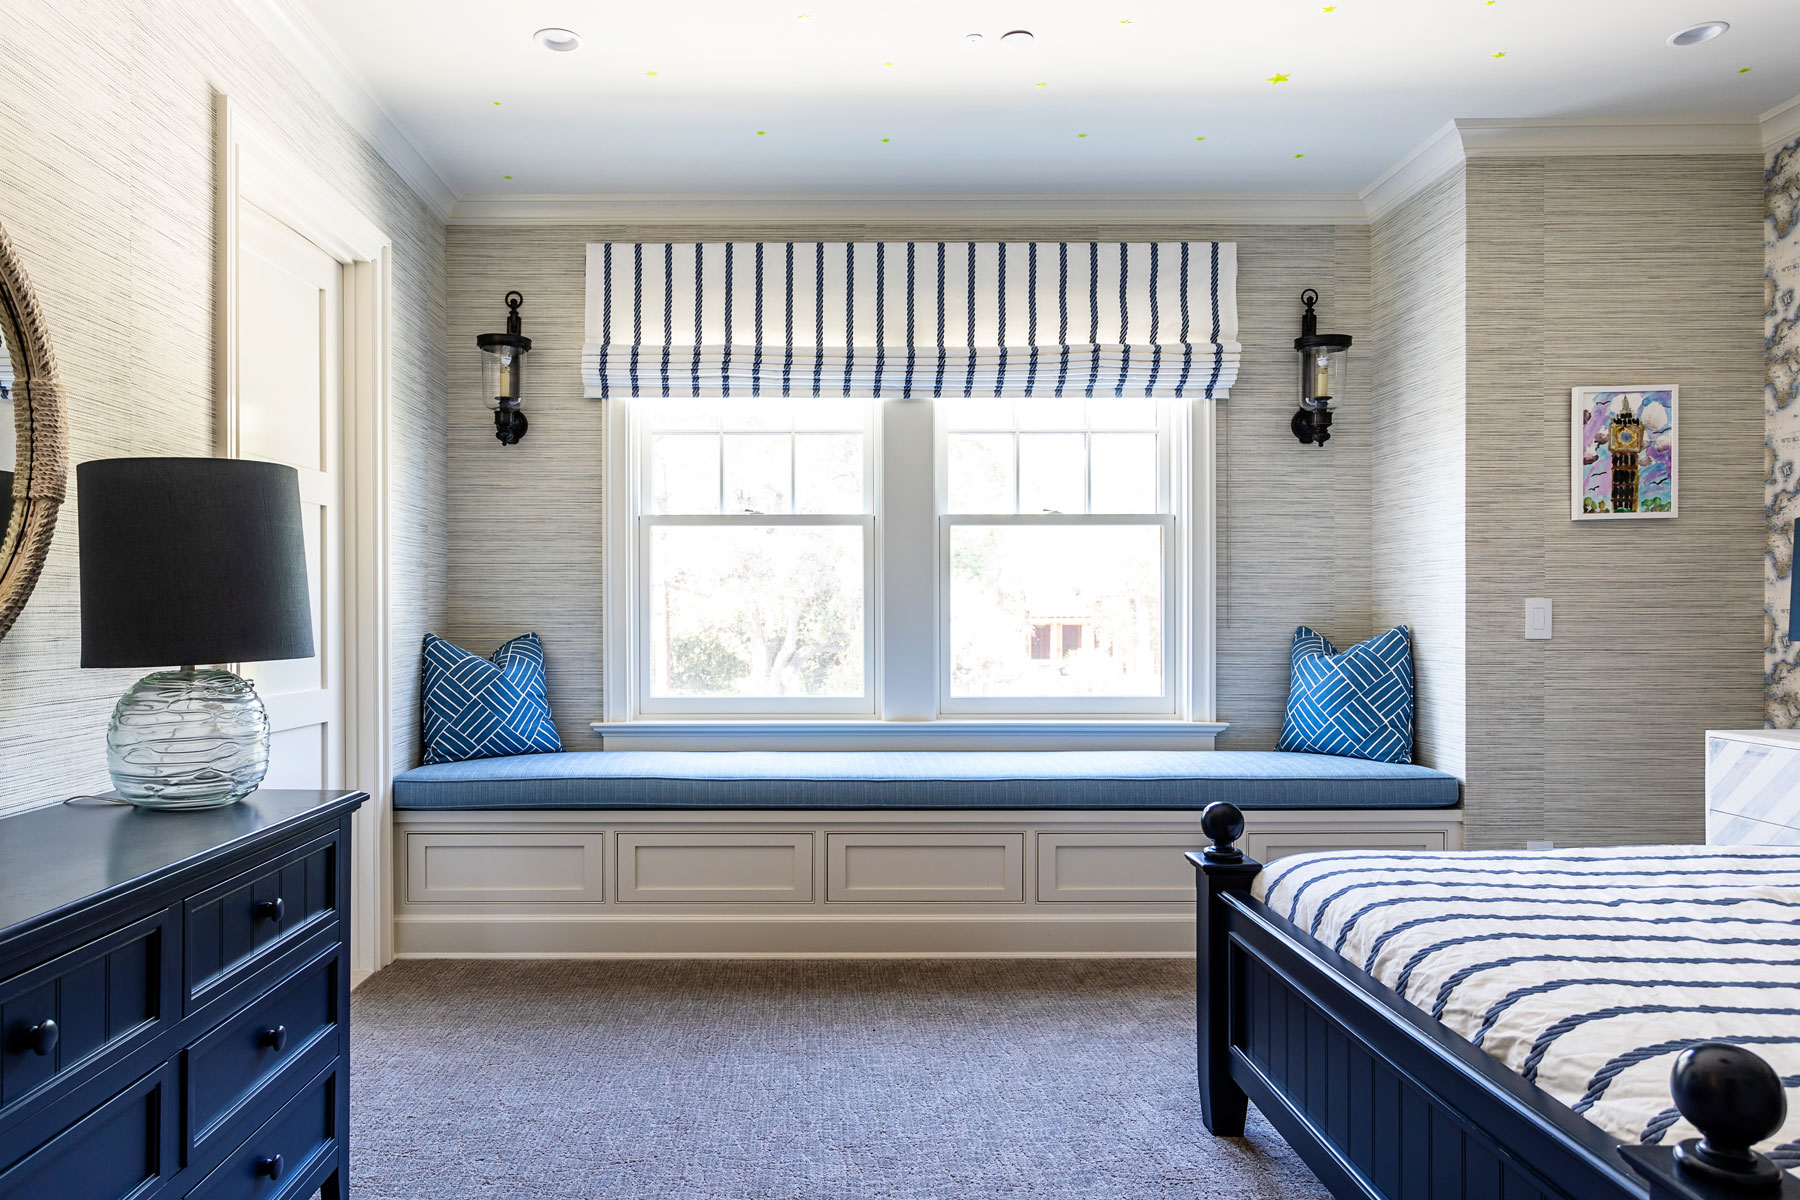 beach-style-bedroom-built-in-window-seat-blue-stripes-waterford-construction.jpg